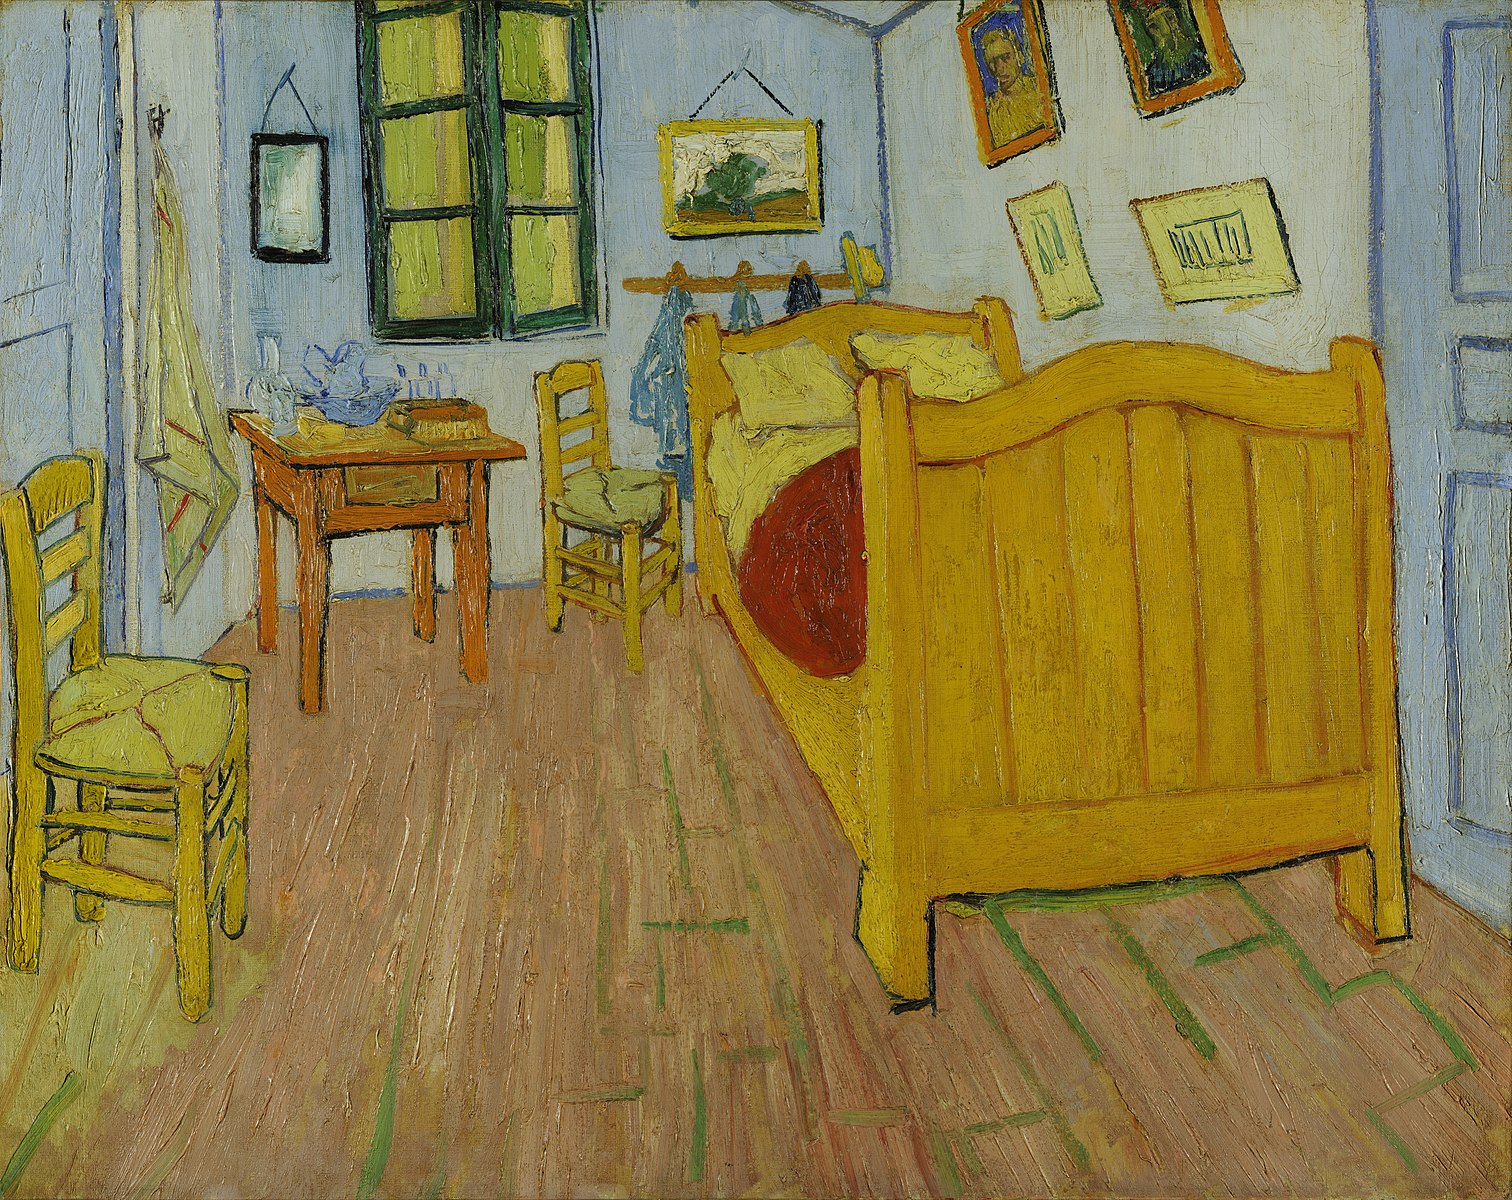 A bedroom with a wooden floor, yellow bed and chair with paintings on the wall